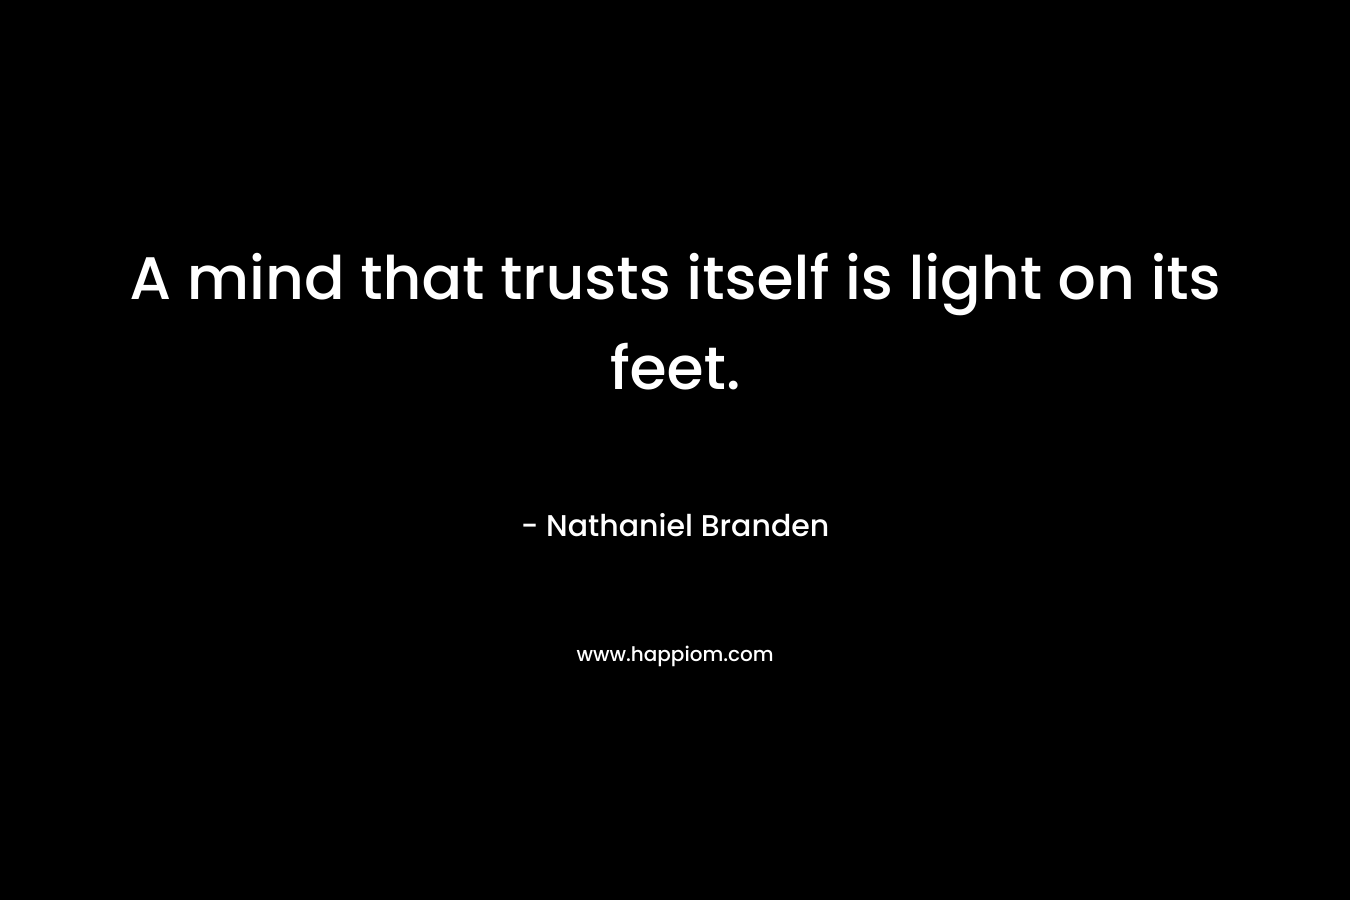 A mind that trusts itself is light on its feet.